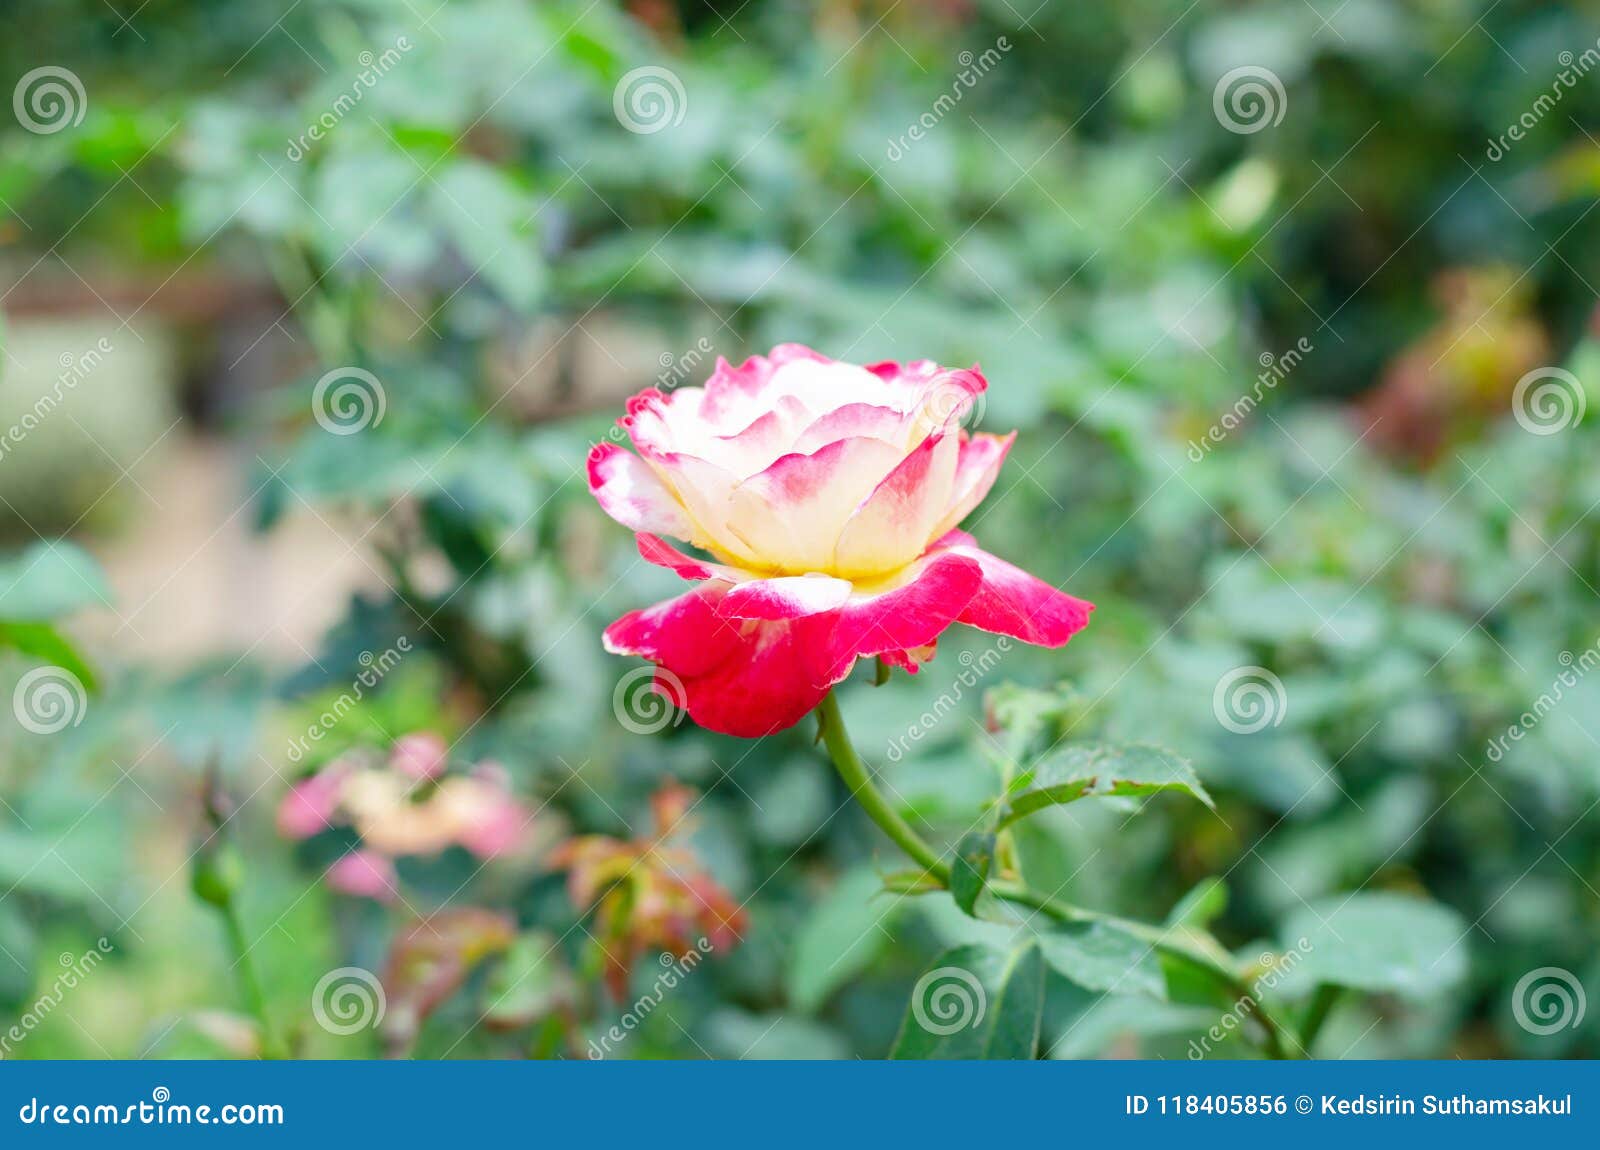 Red And White Of Double Delight Hybrid Tea Rose Stock Photo Image Of Bouquet Climbing 118405856